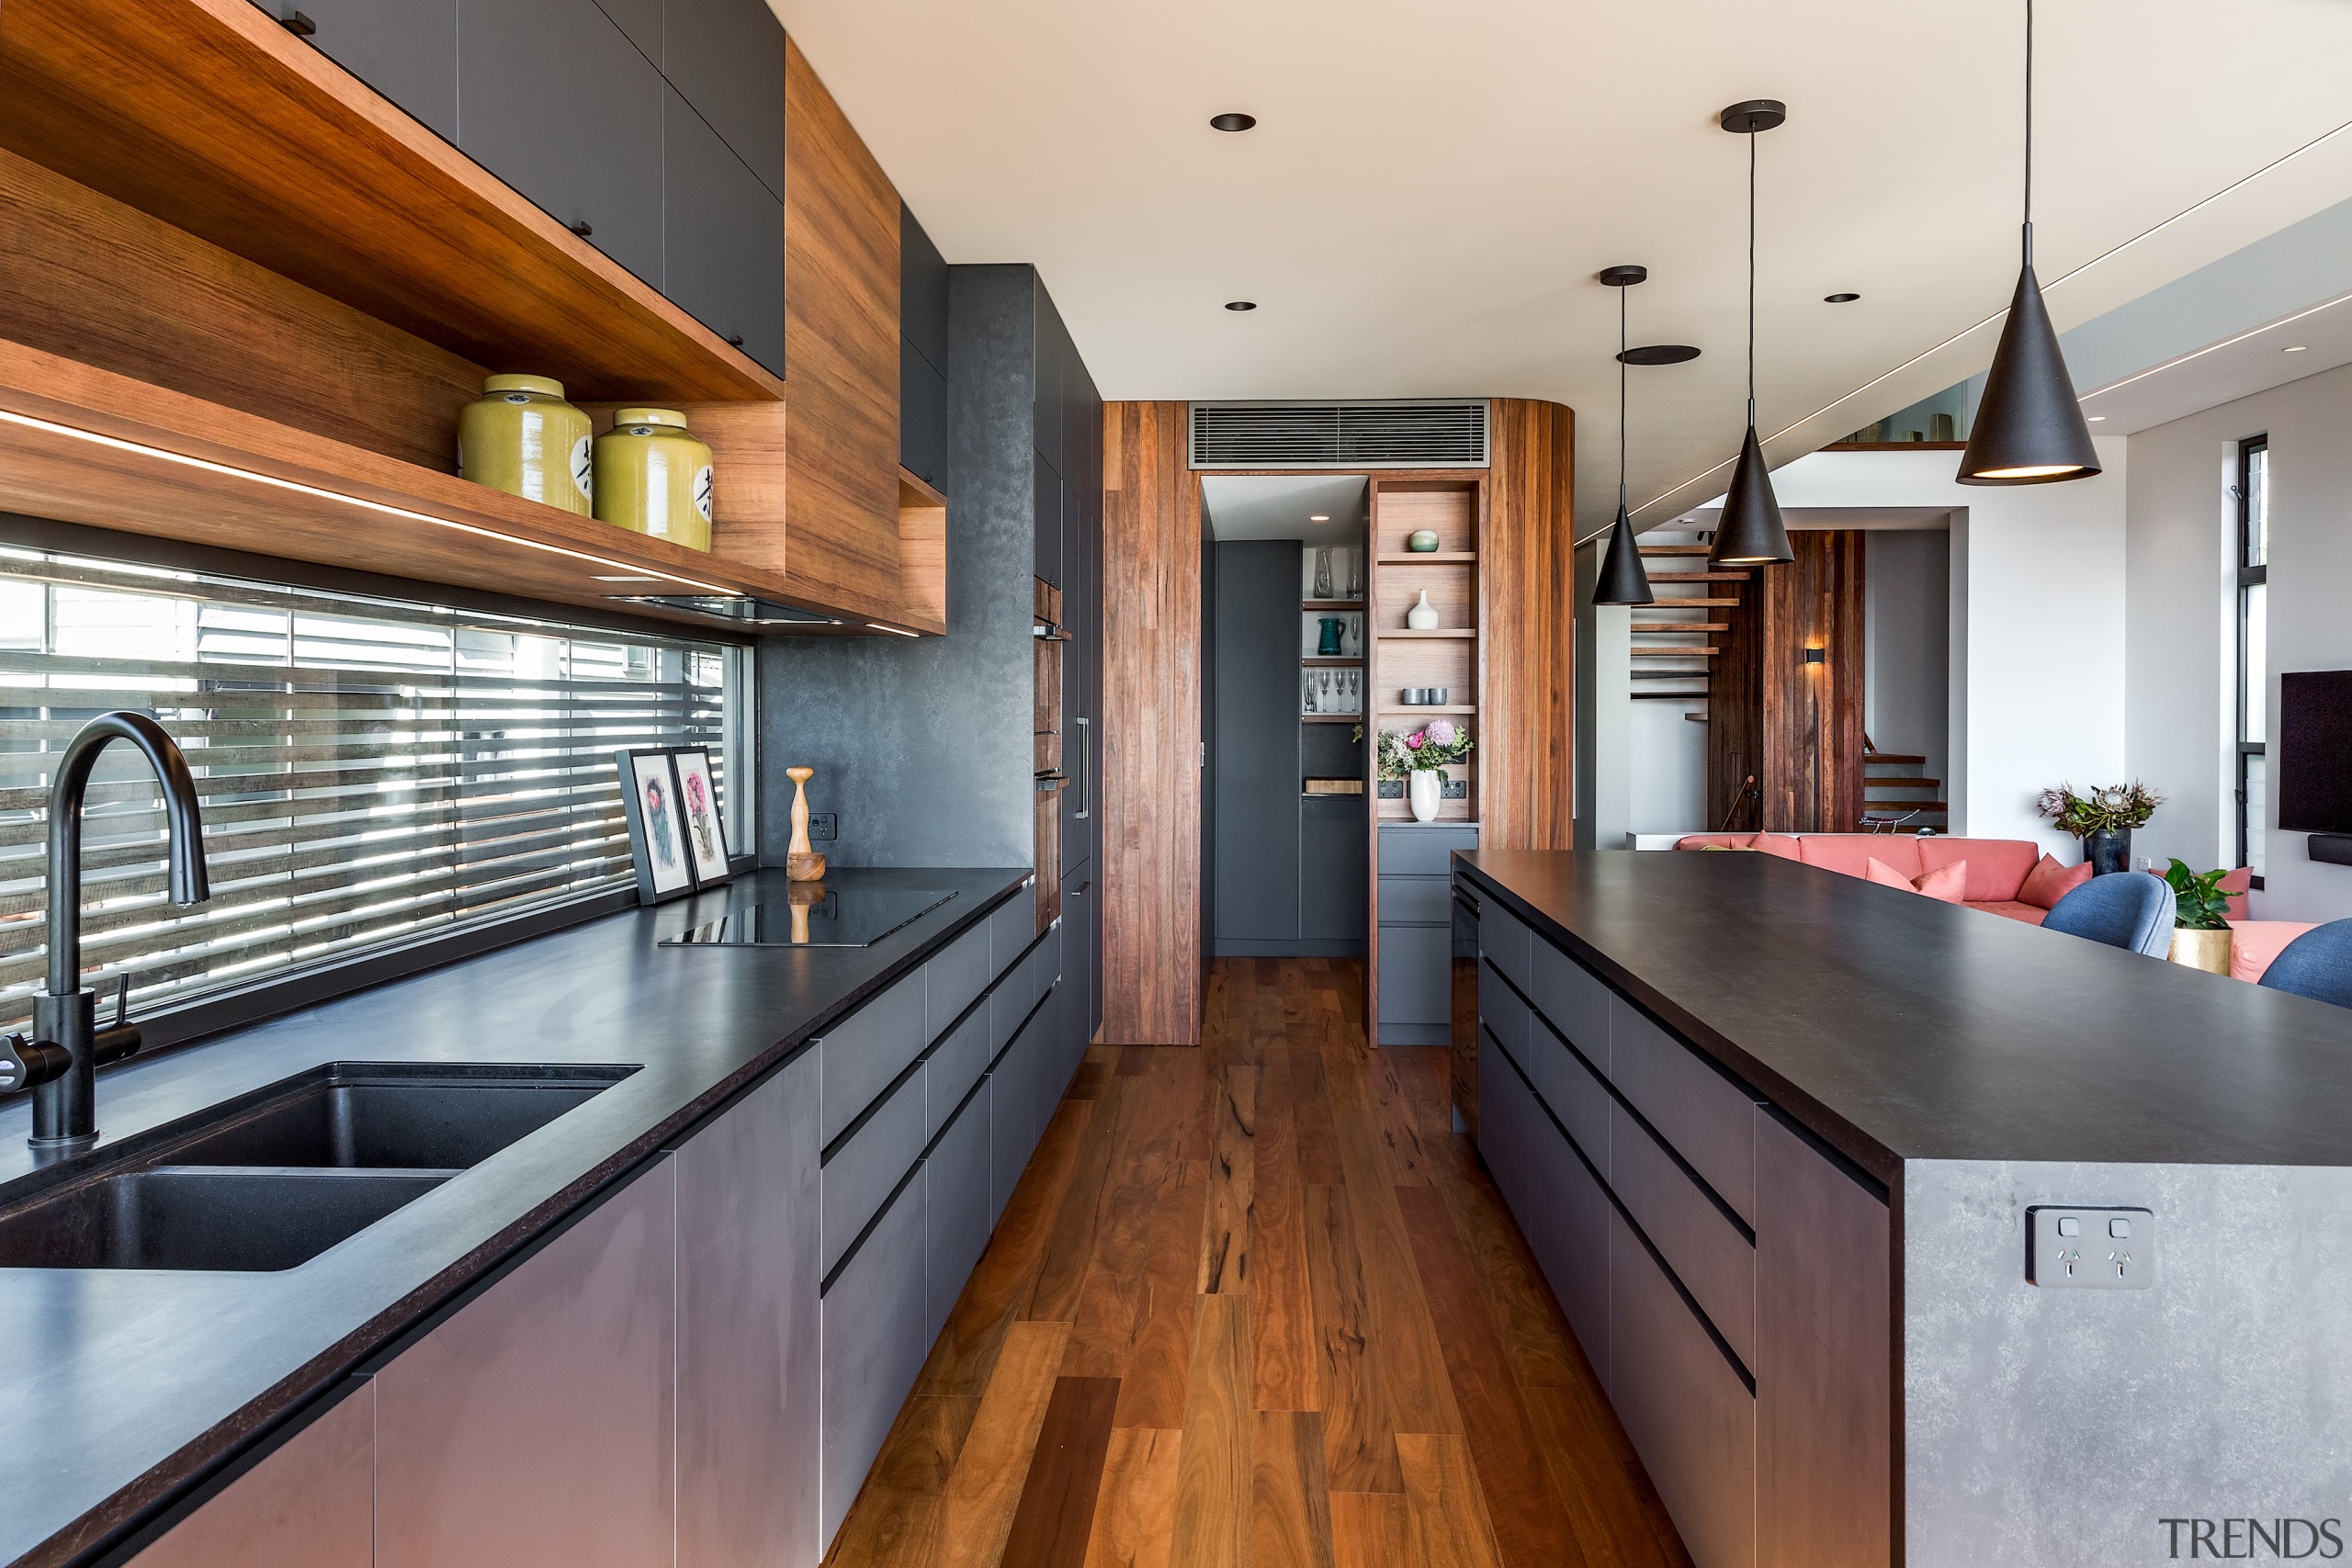 Rich timber-look surfaces work well with the black 